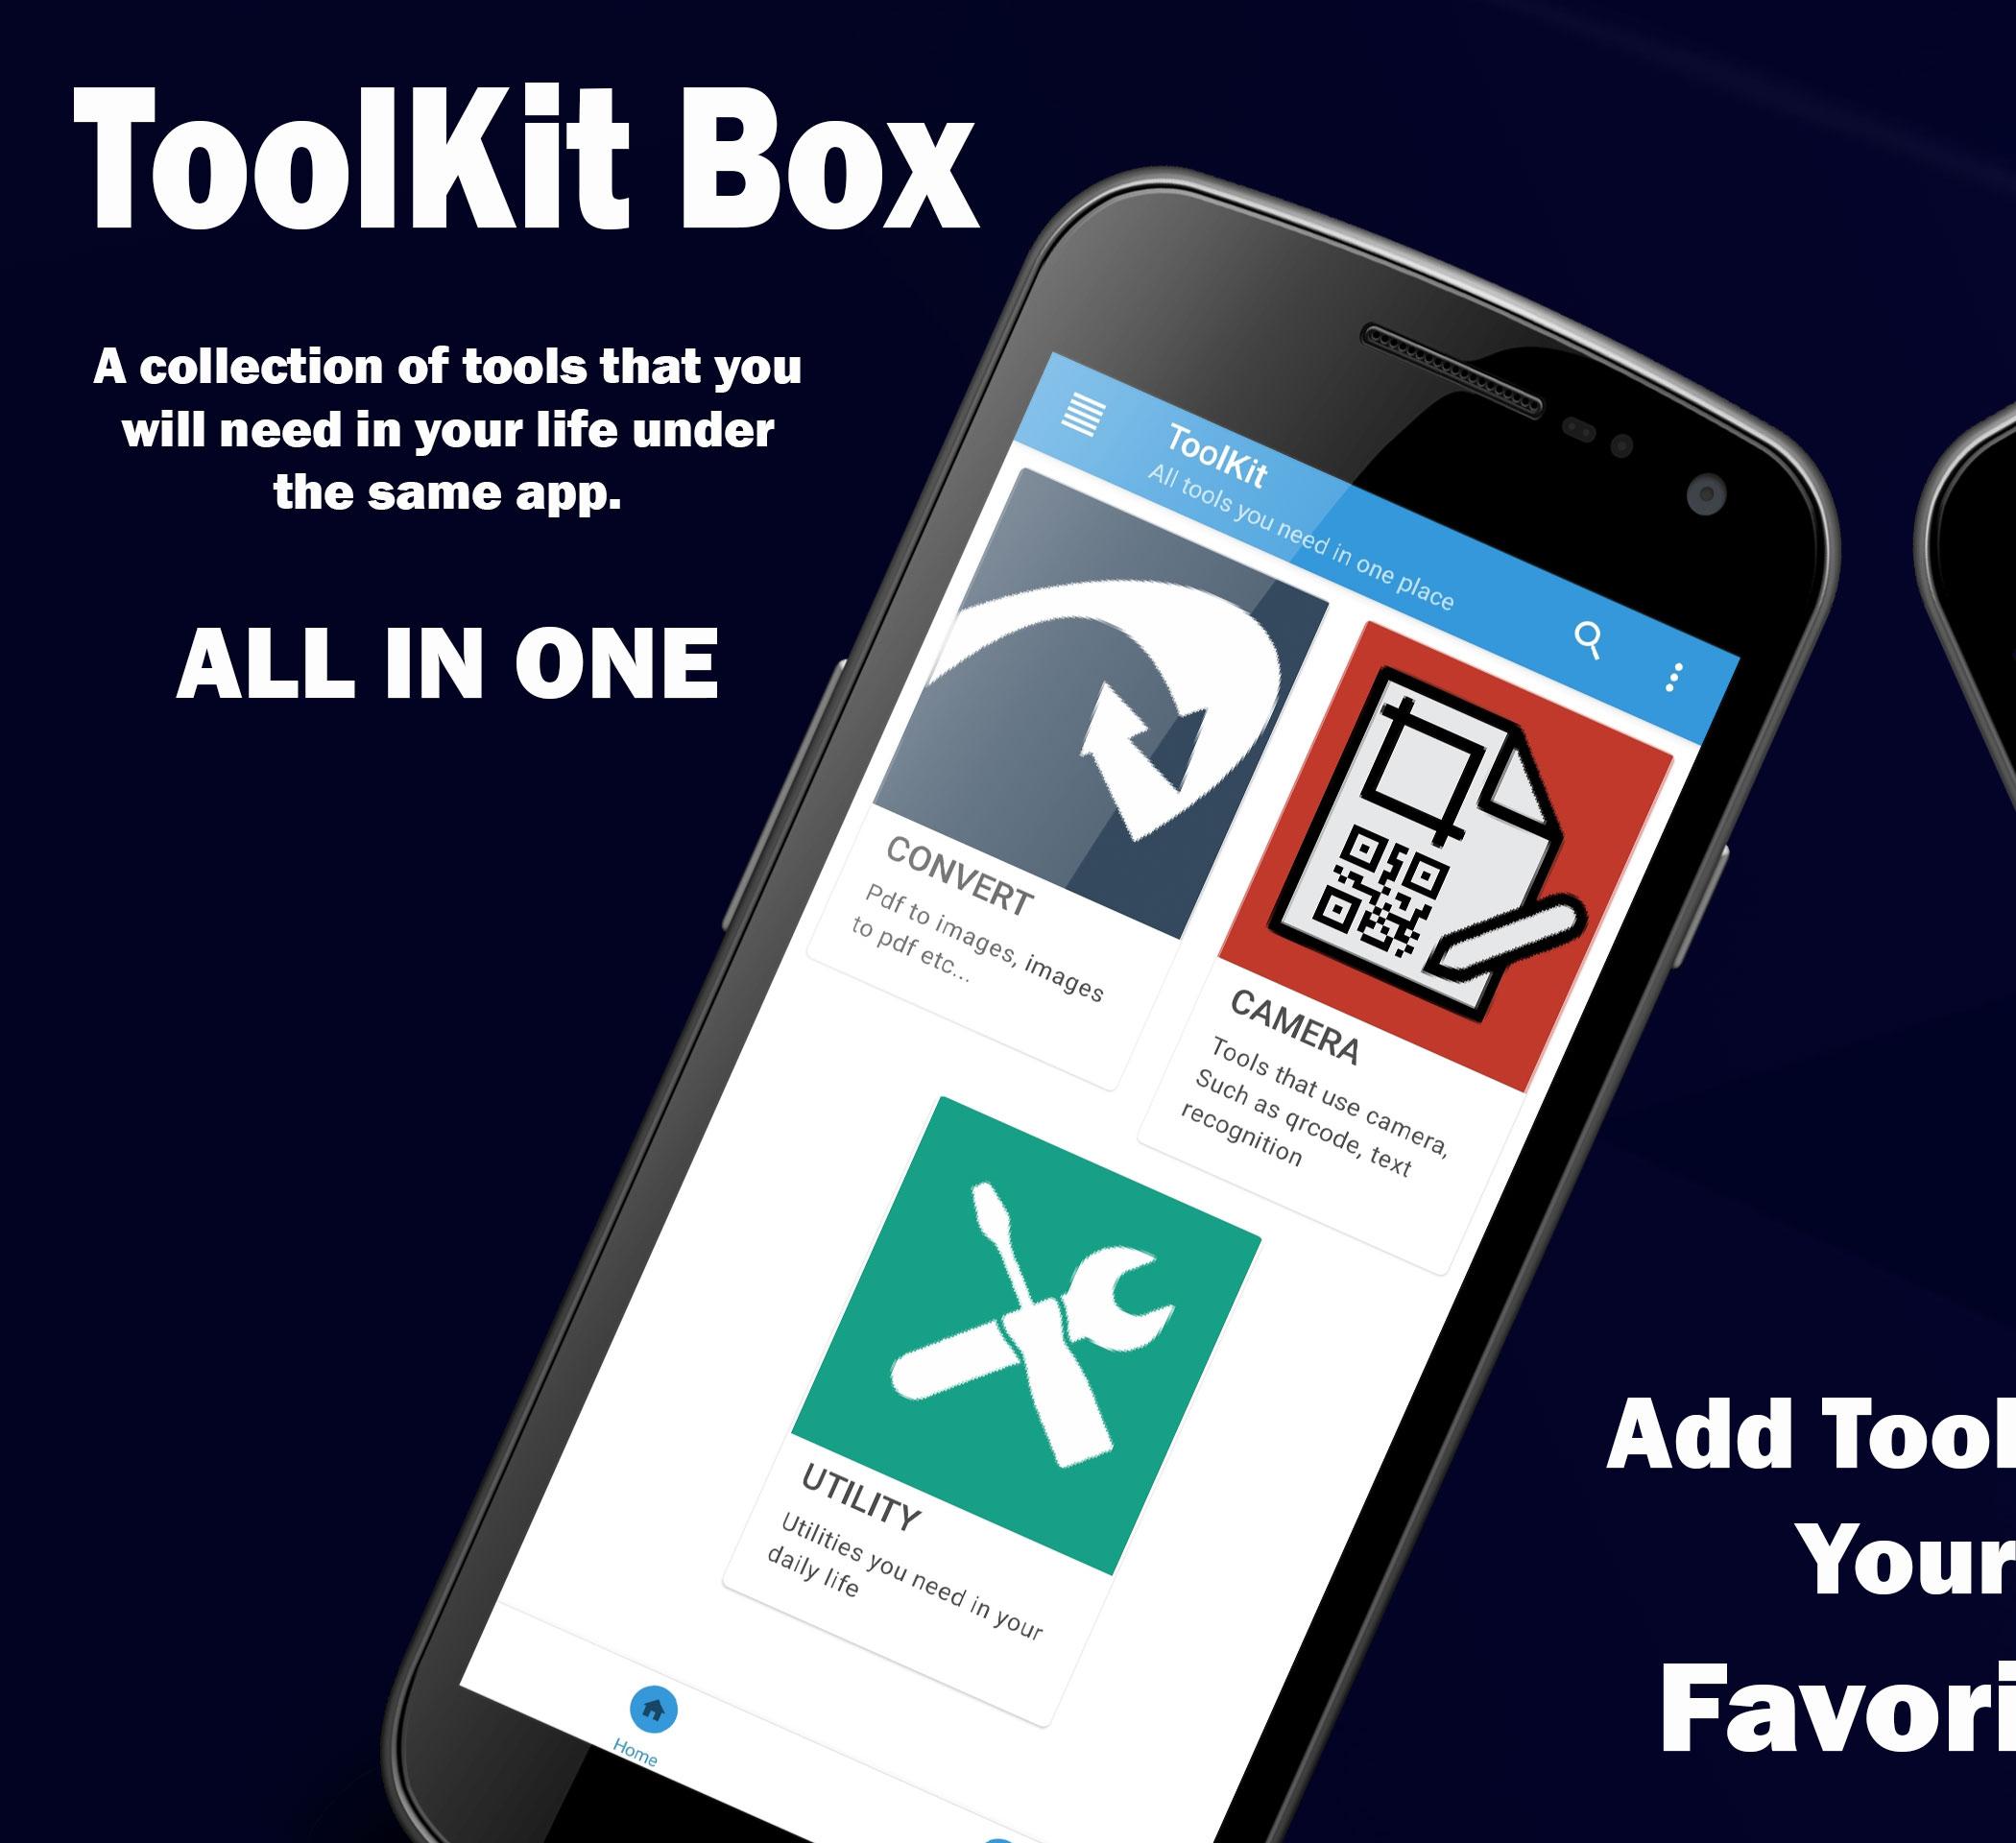 Toolkit Box | All Tools you need in one place 3.0 Screenshot 16